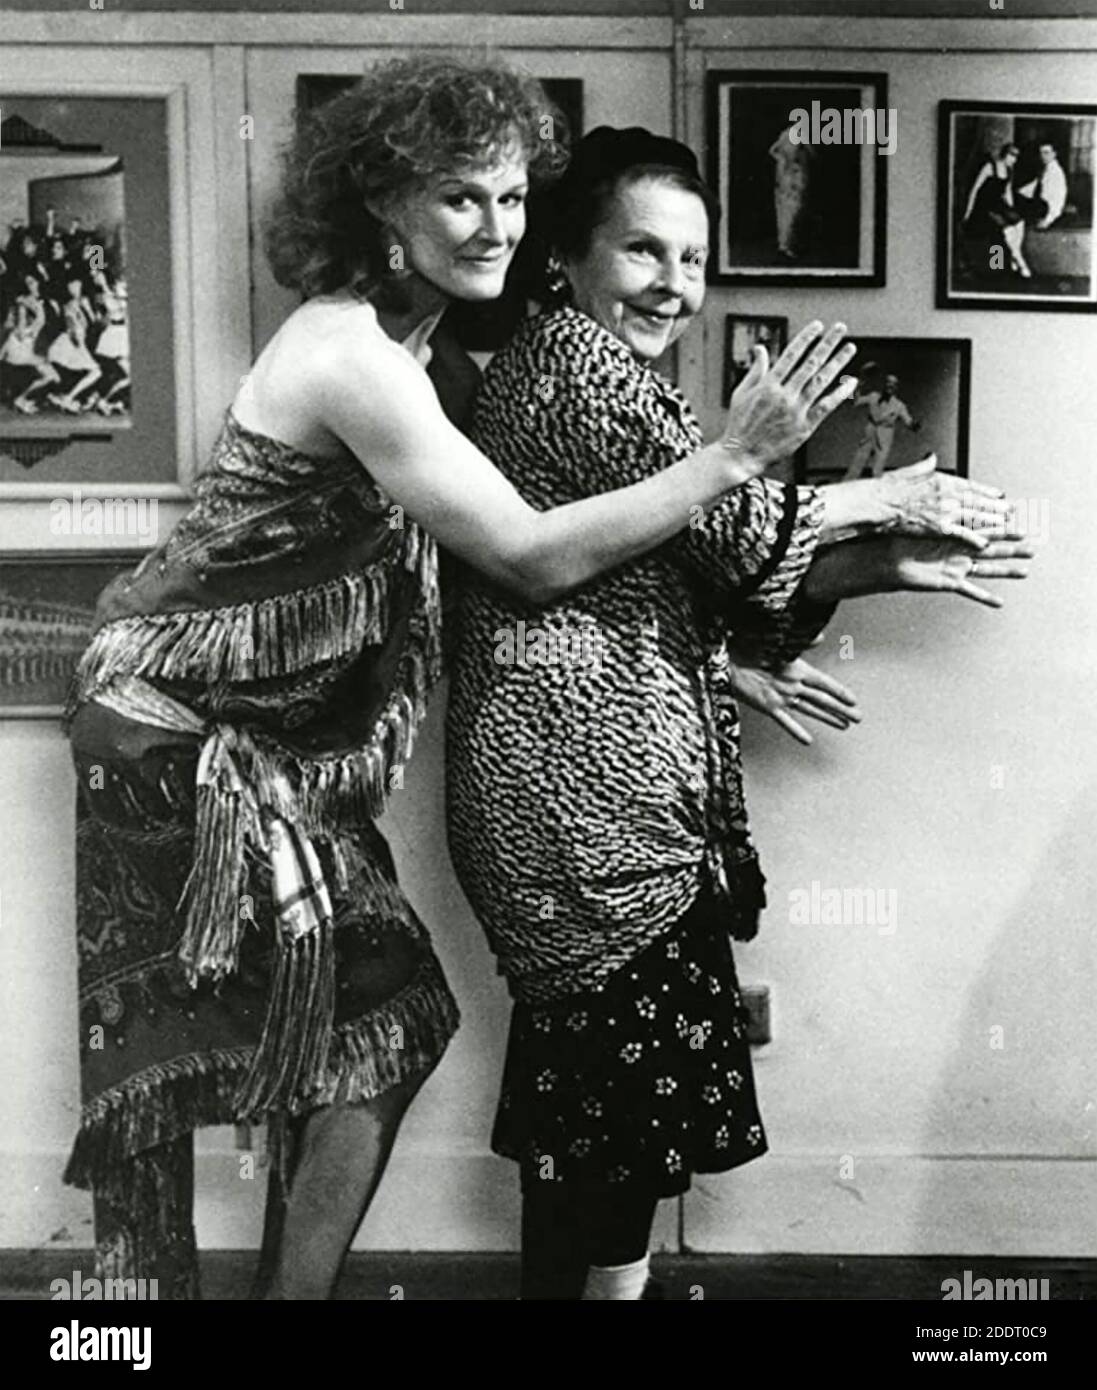 MAXIE 1985 Orion Pictures film with Glen Close at left and Ruth Gordon Stock Photo